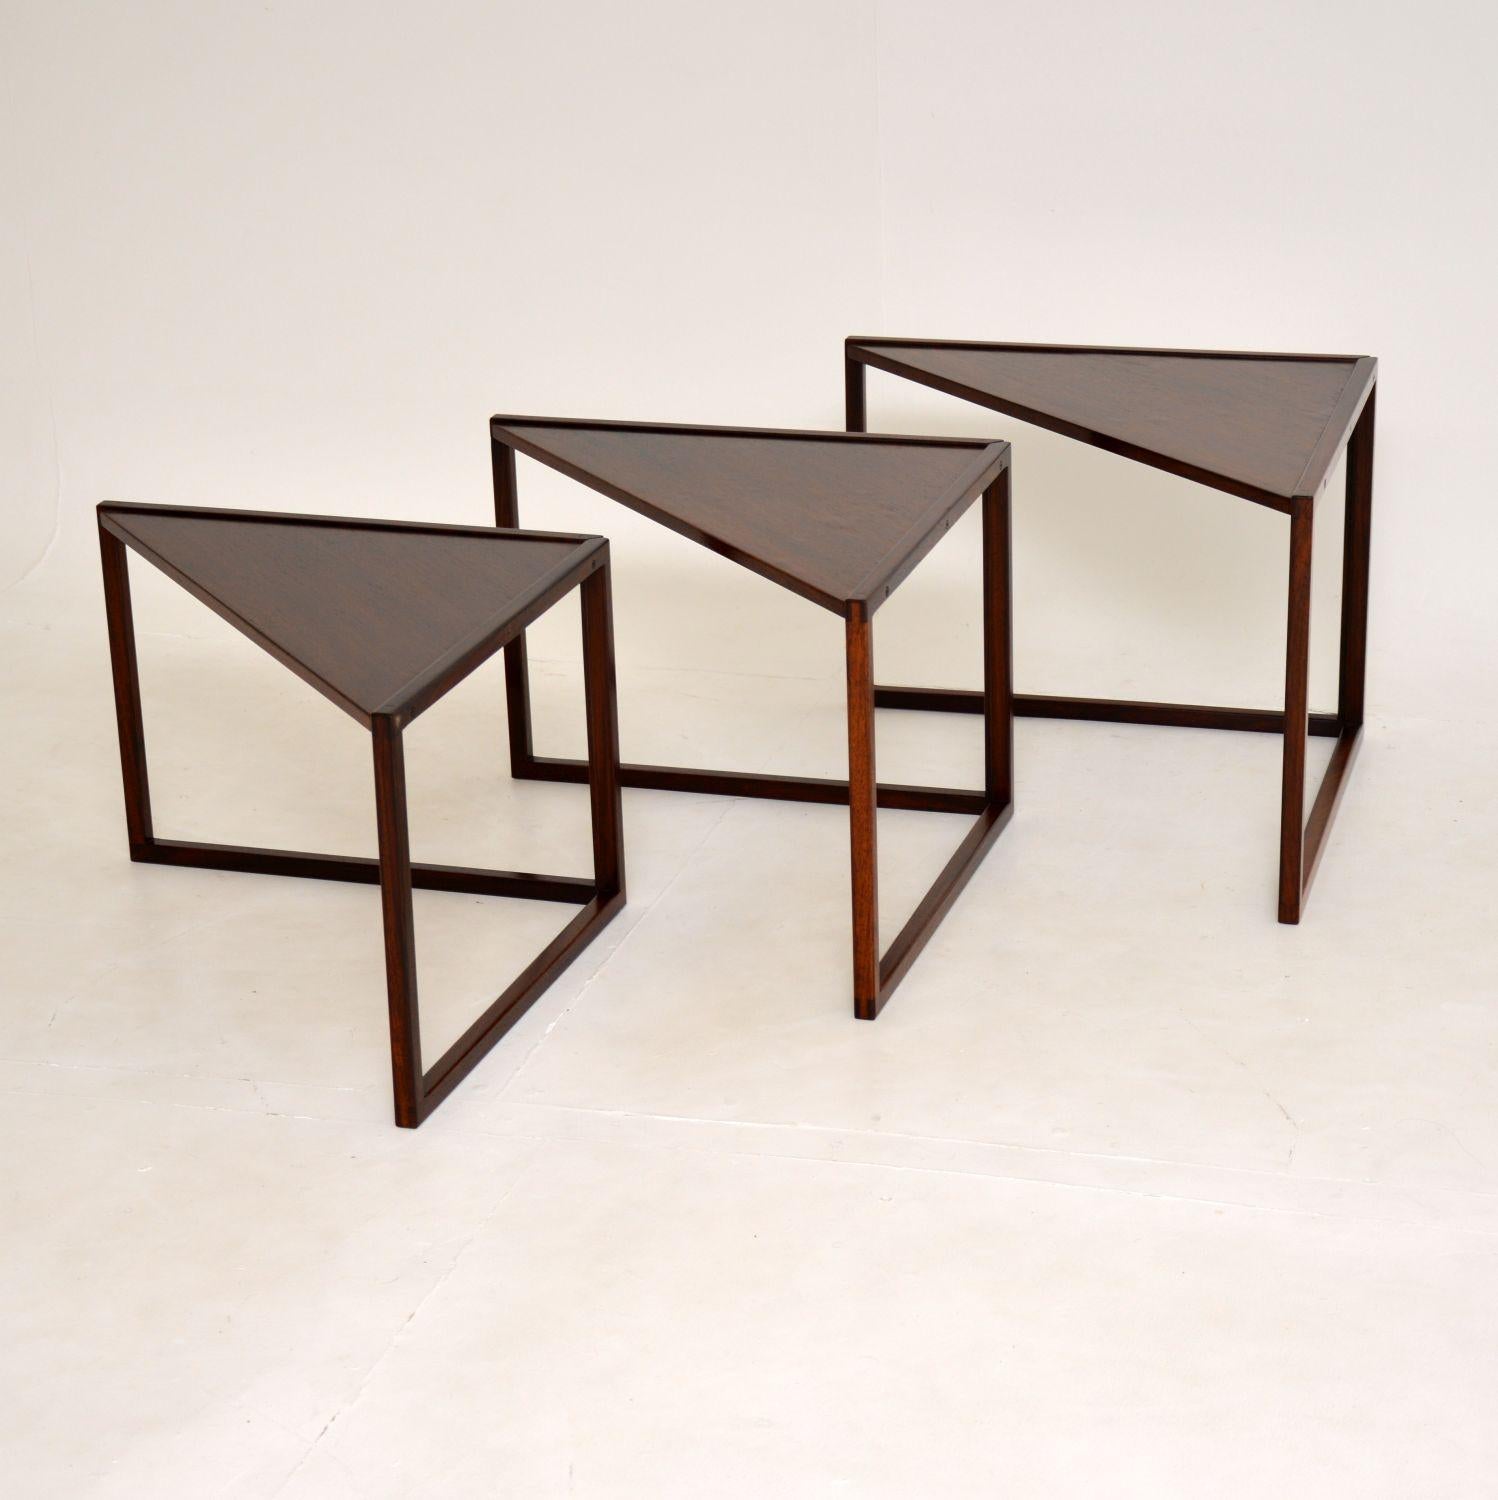 A stunning and extremely rare Danish nest of tables. These were designed by Kai Kristiansen, they were made in Denmark by Vildbjerg Mobelfabrik and they date from the 1960’s.

The triangular shaped design is very stylish and practical, the tops